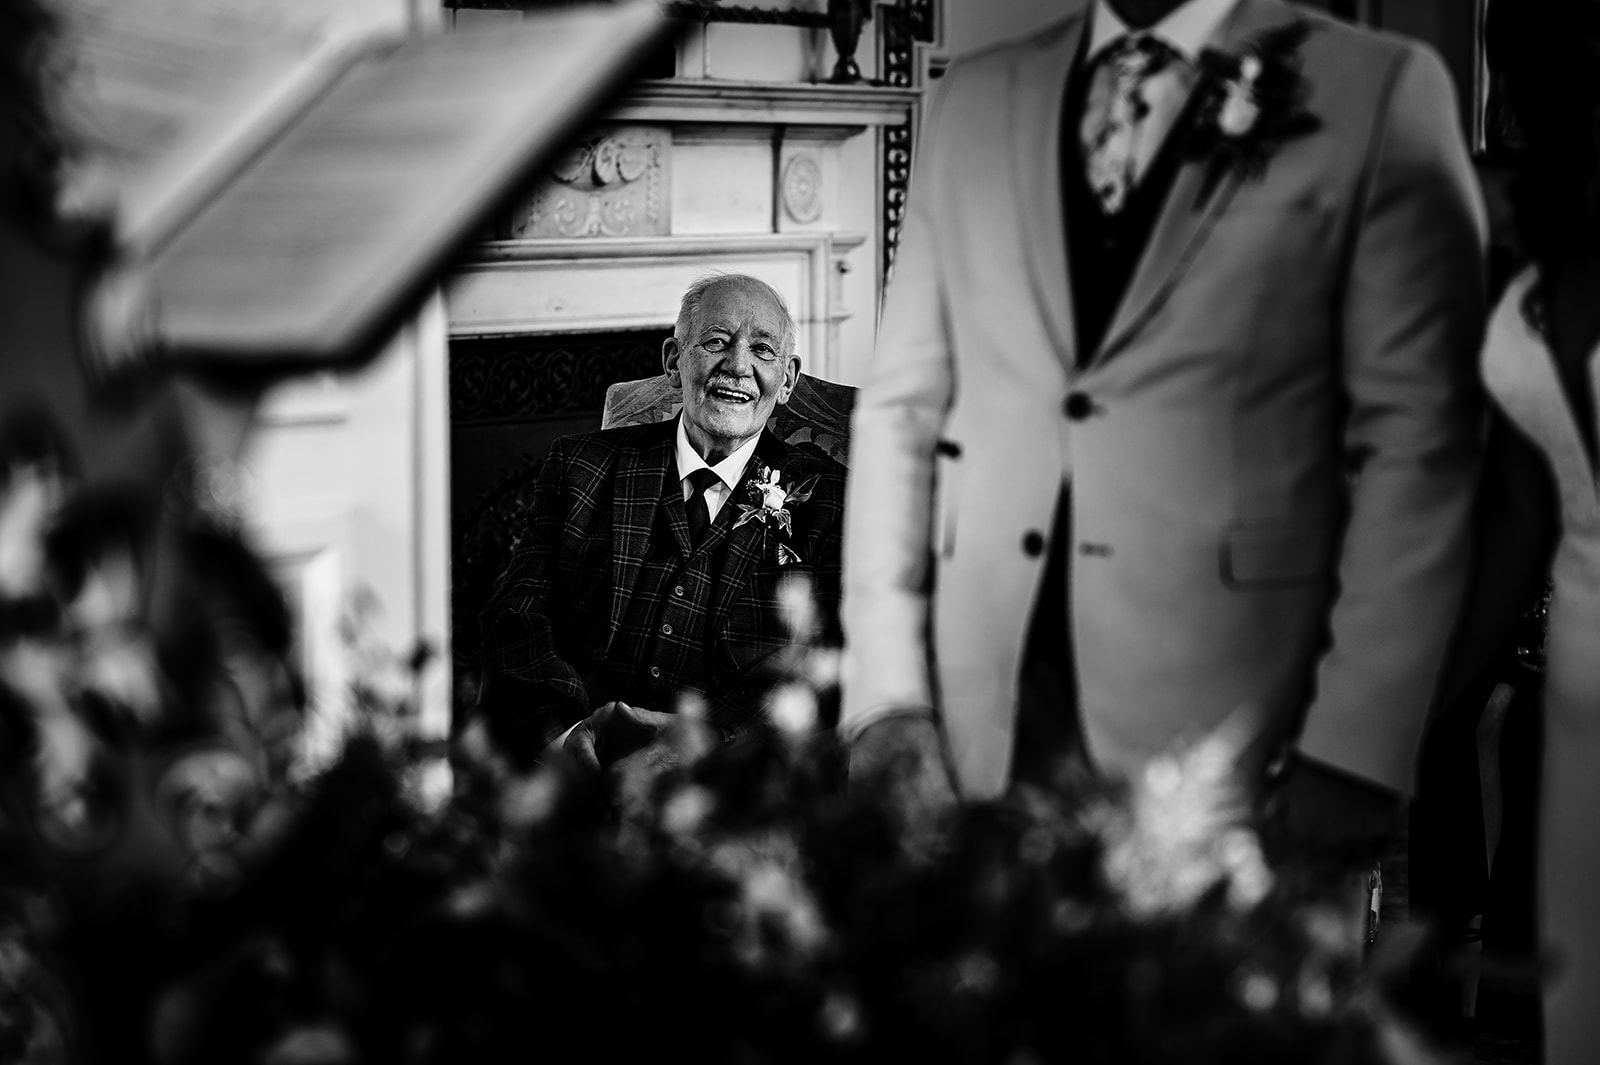 Dad looking at his son and smiling during in intimate wedding ceremony at Stapleford Park hotel Amanda Forman Photograph